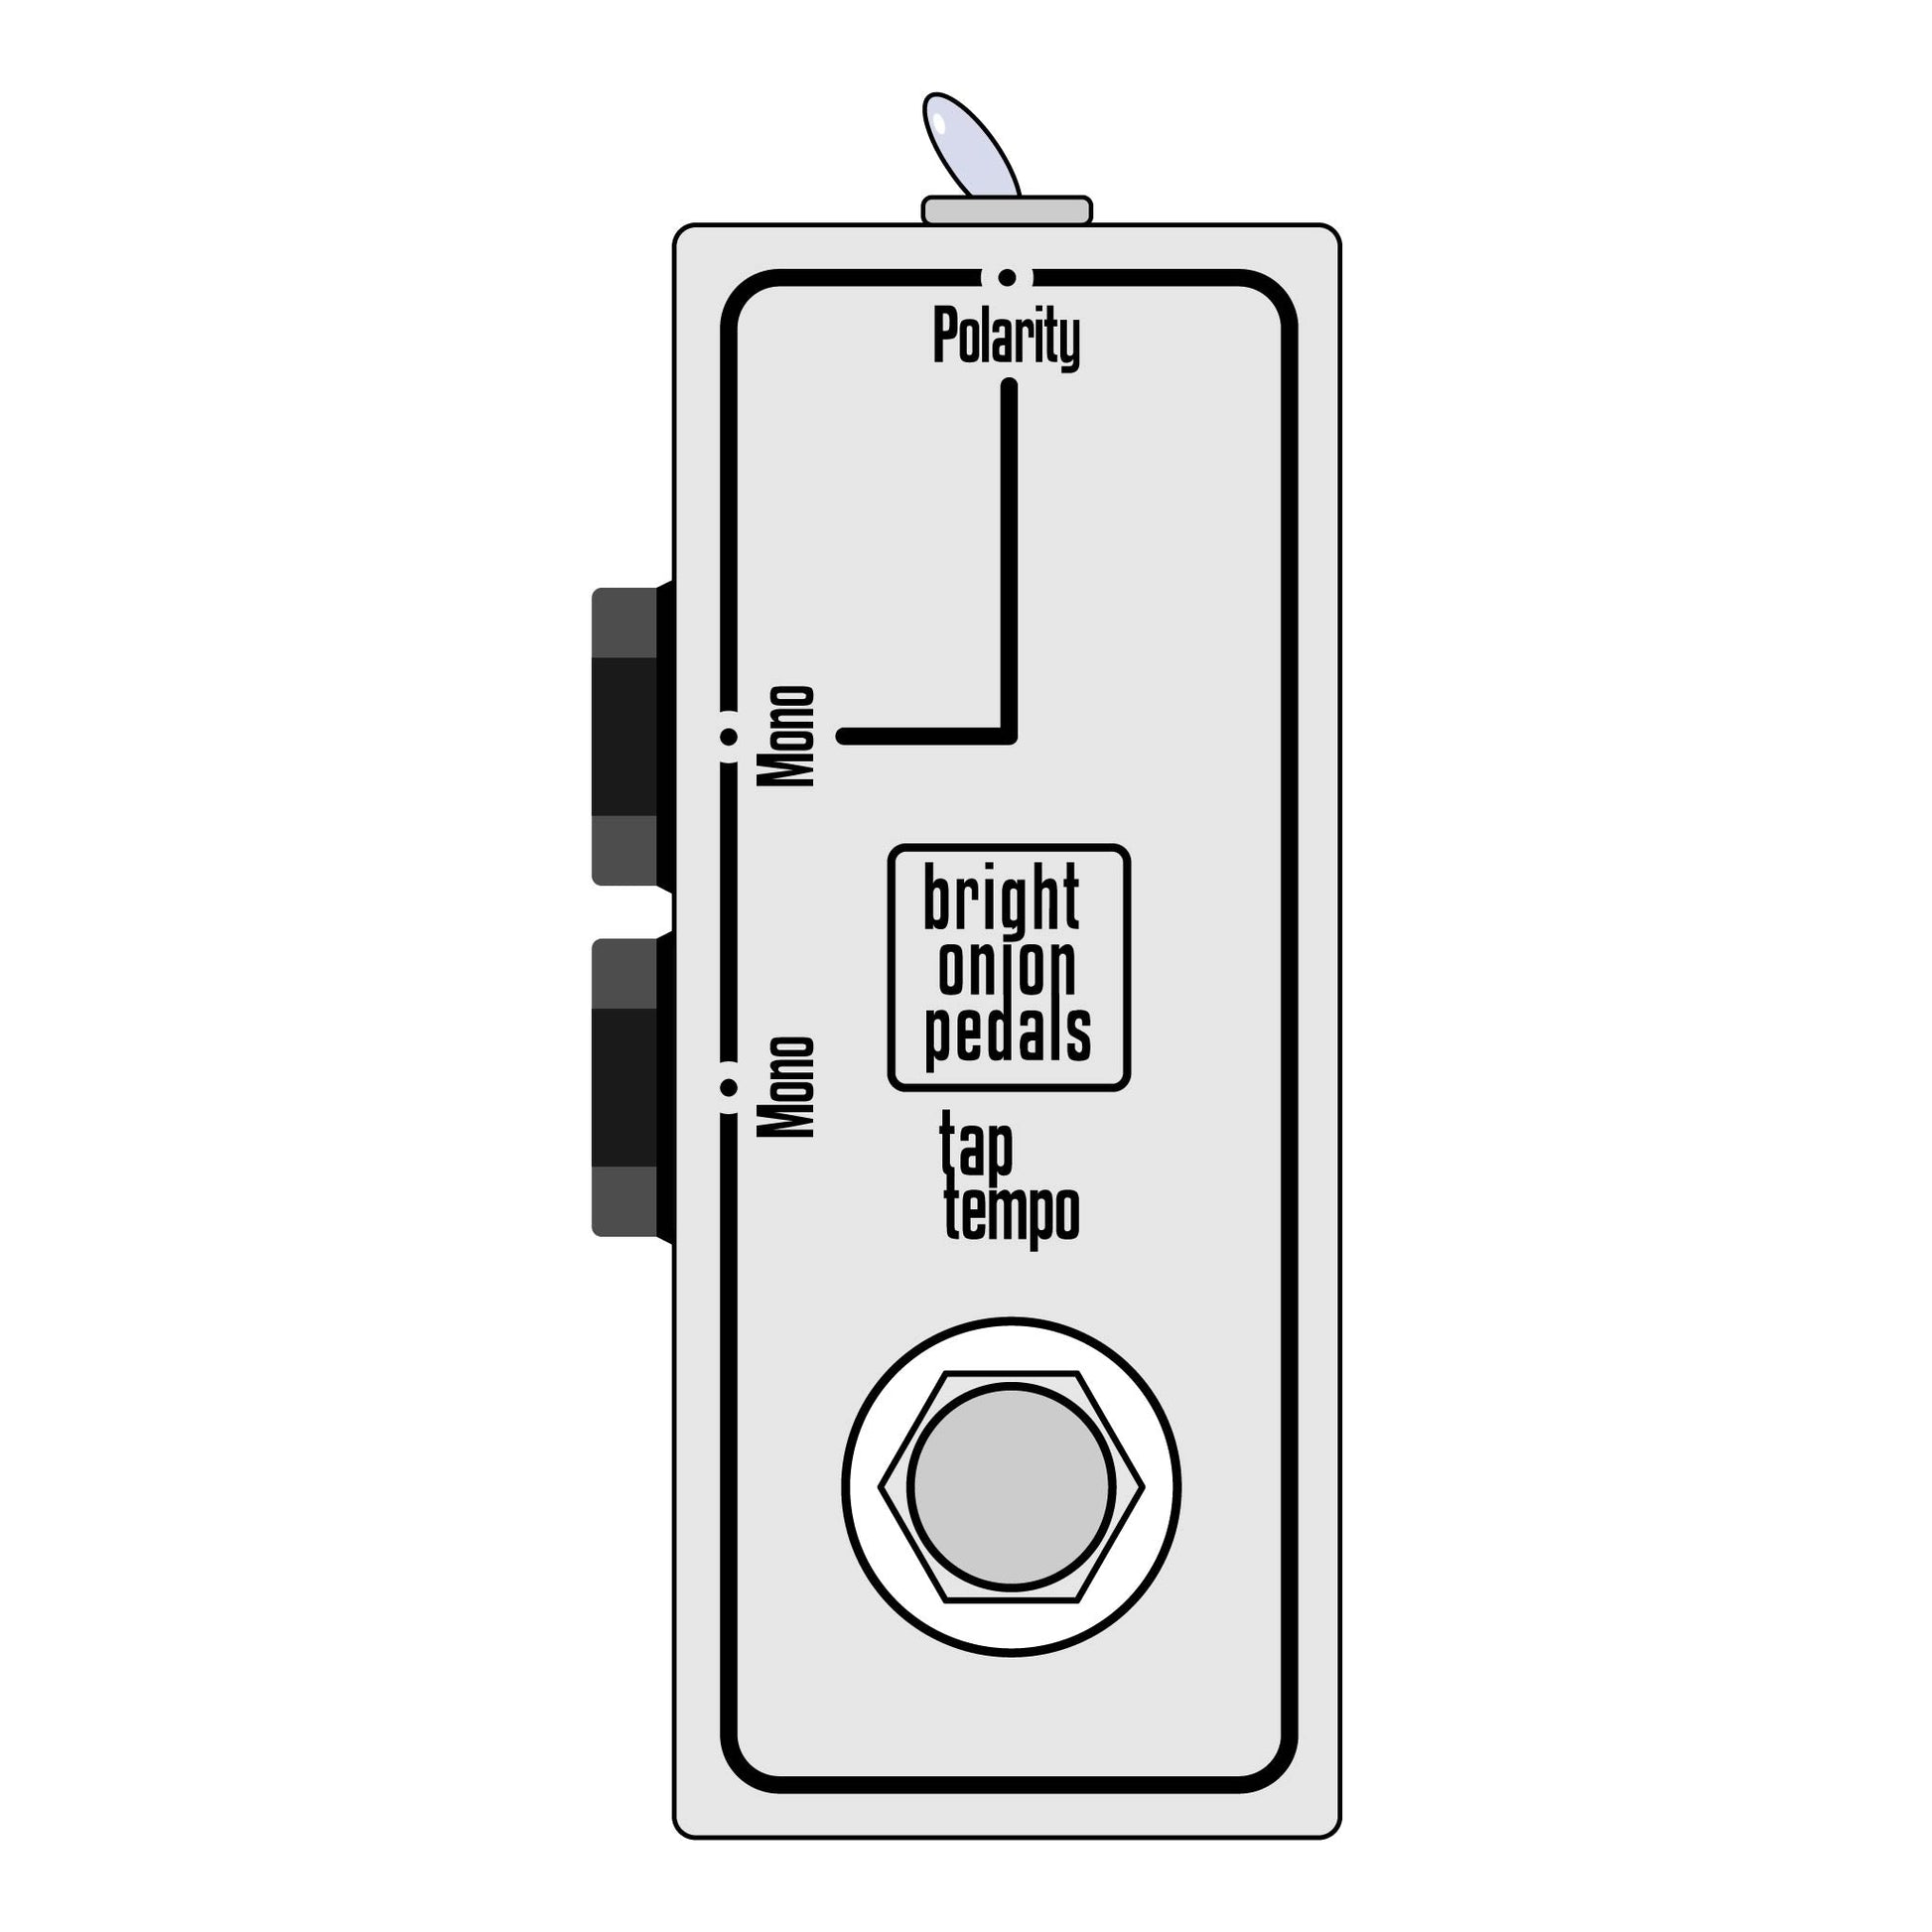 Dual Tap Tempo Switch with Polarity Switch - Bright Onion Pedals